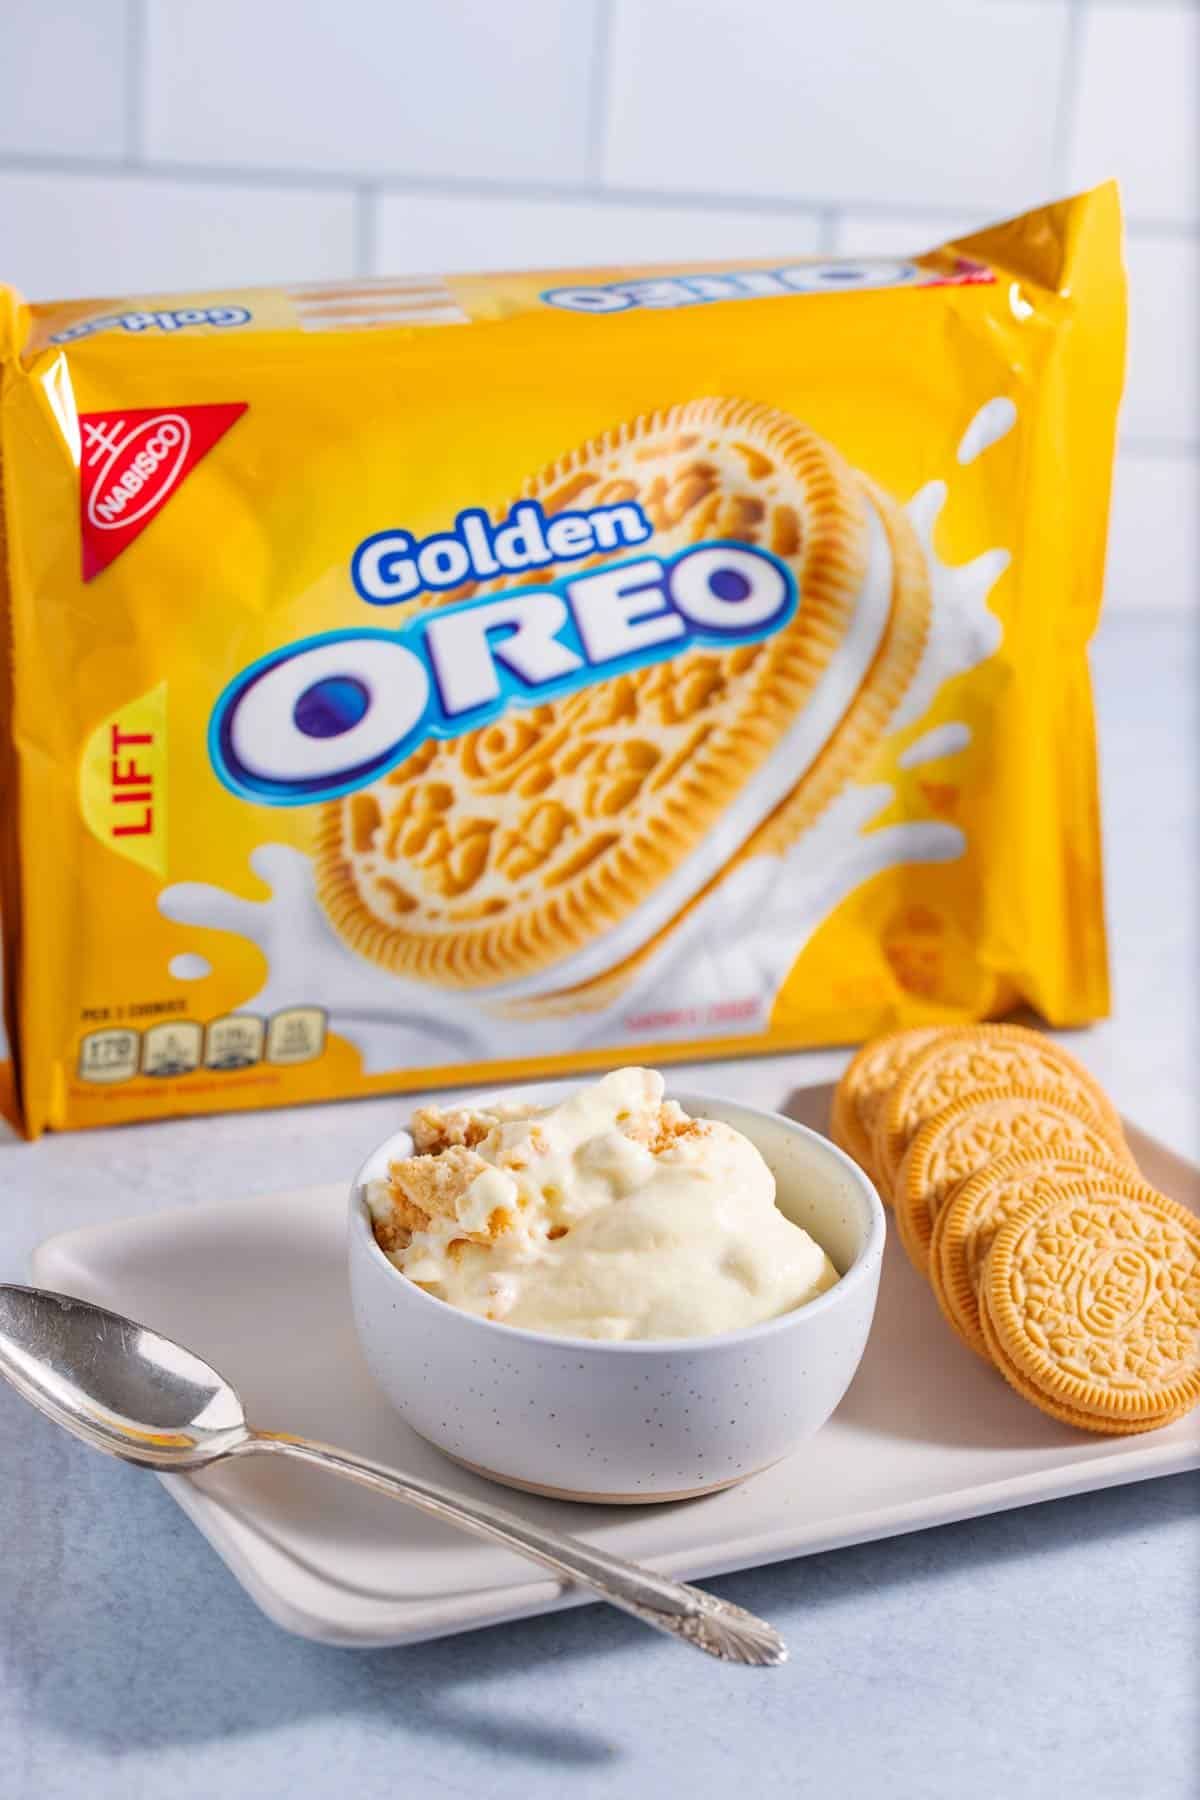 A bowl of banana pudding made with golden Oreos with a package of golden Oreos in the background.